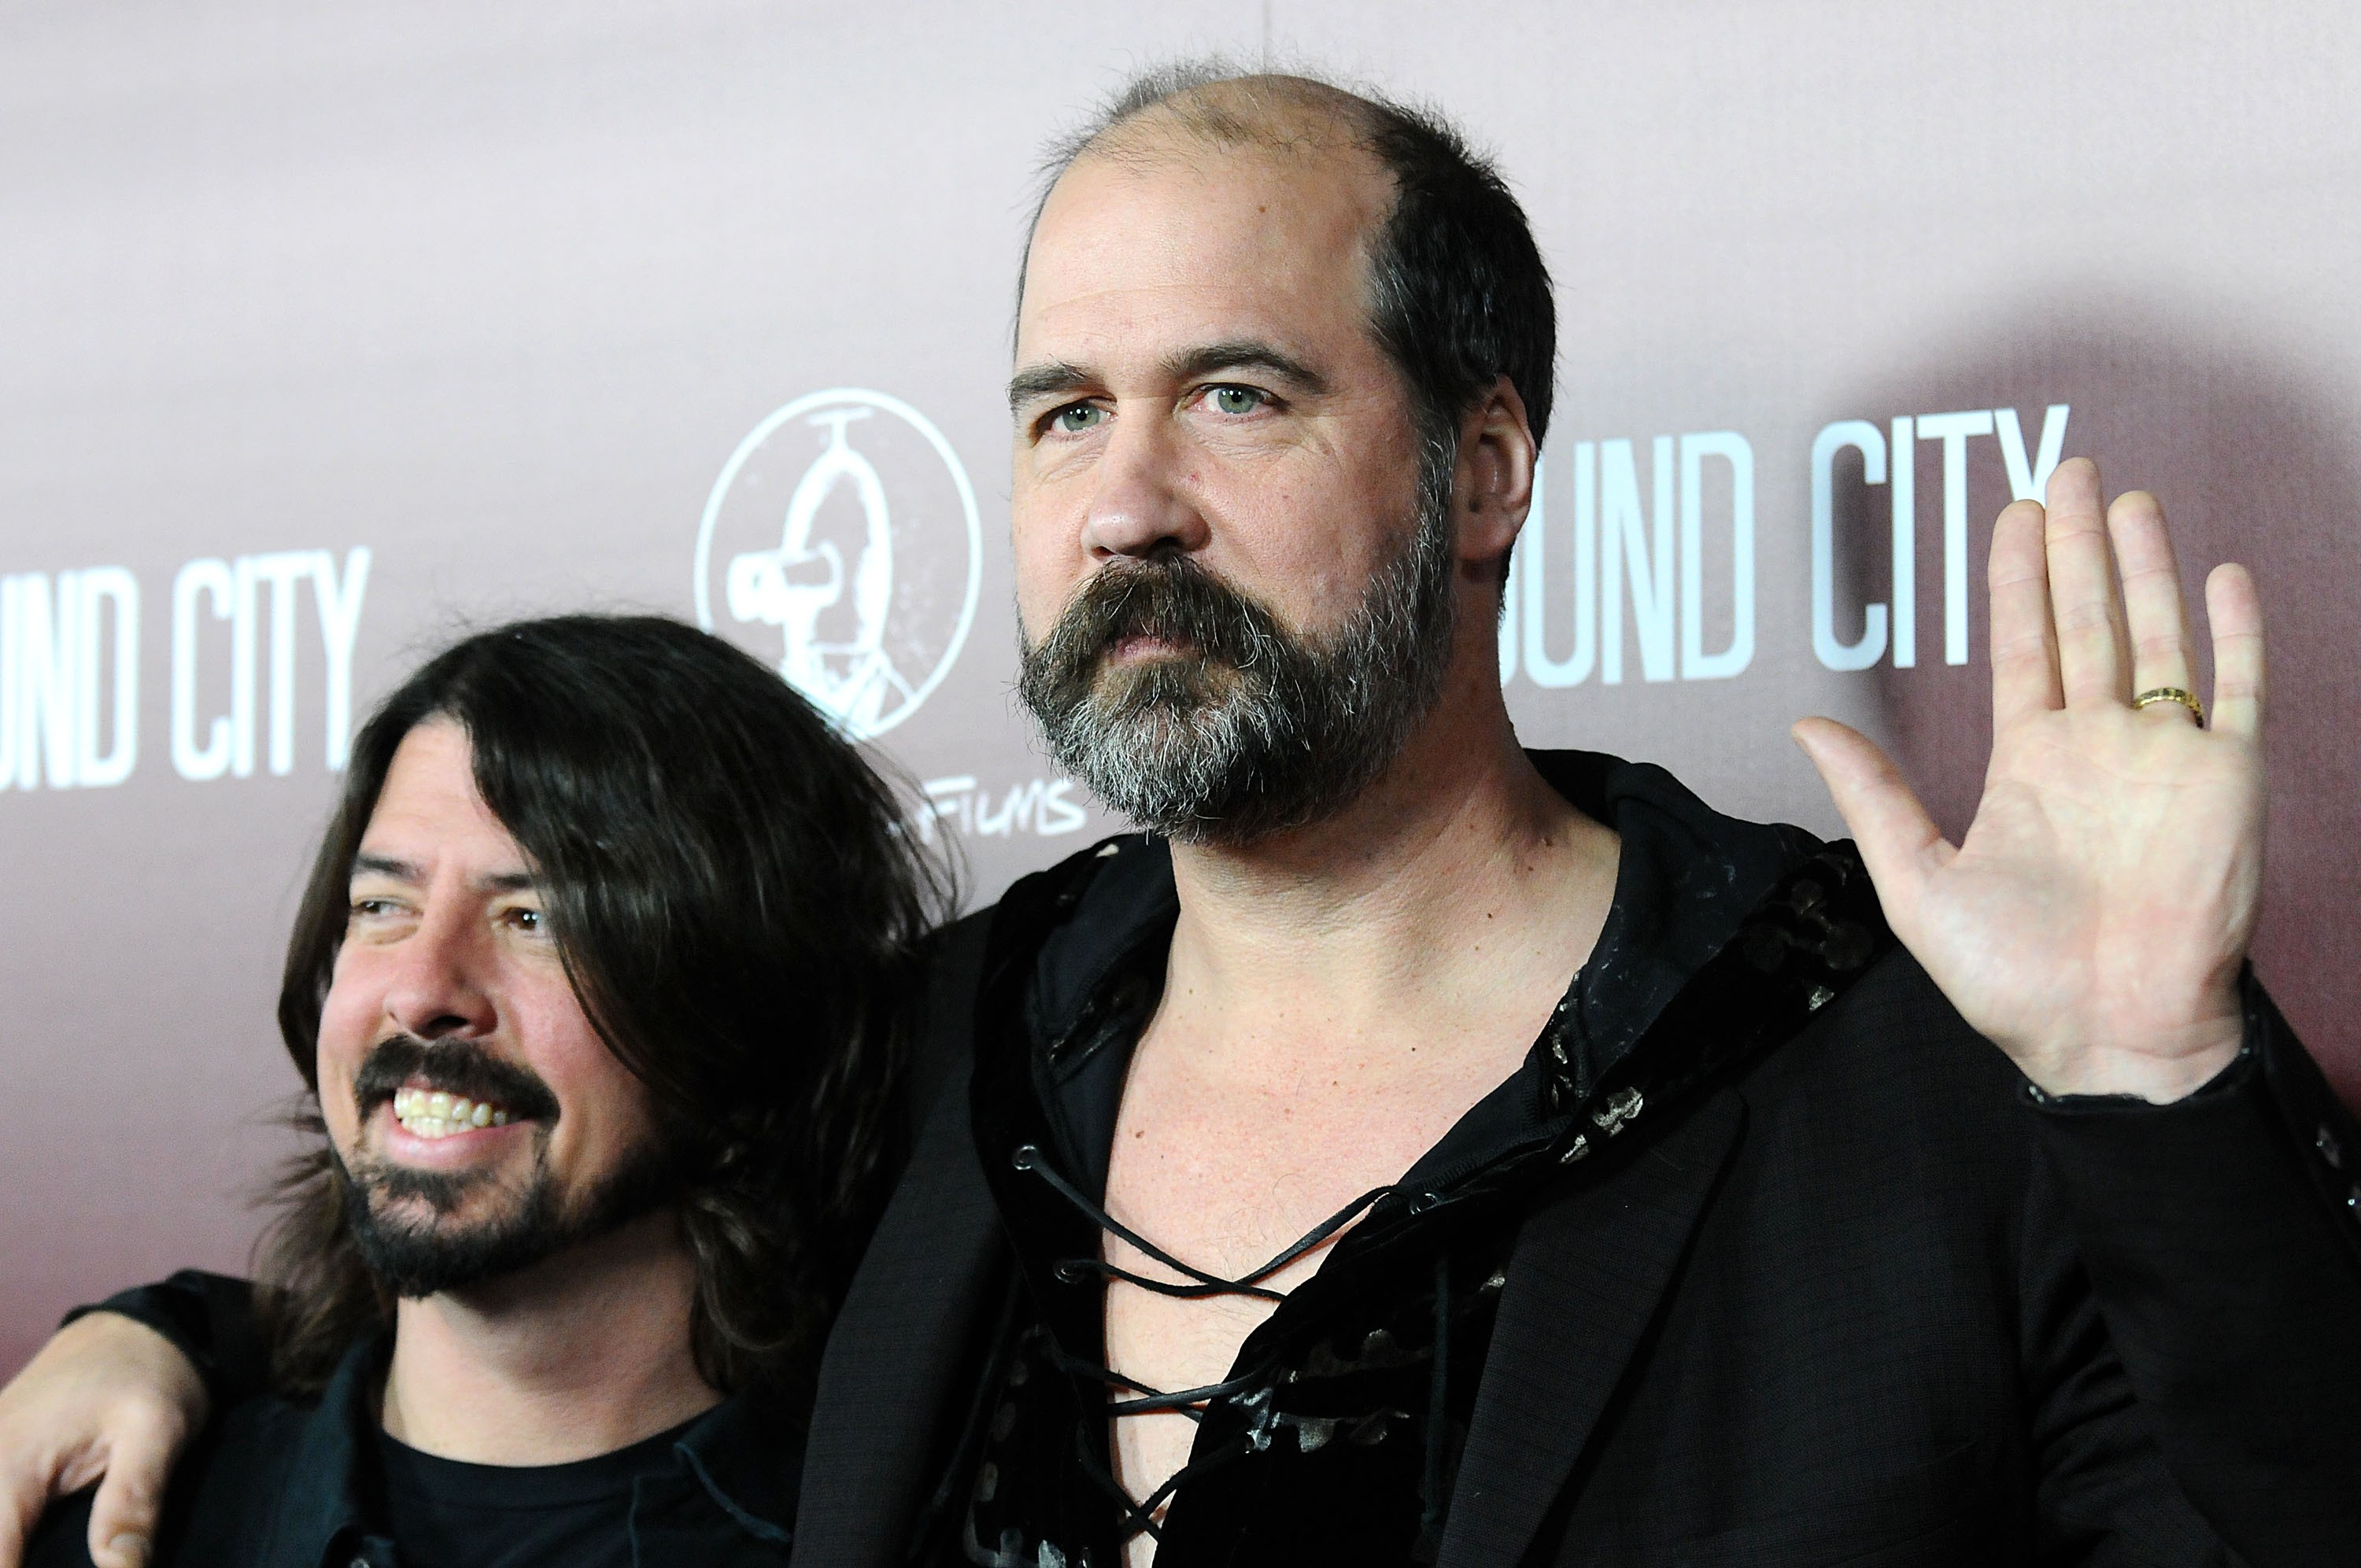 Krist Novoselic And Dave Grohl Briefly Reunite To Cover Molly S Lips At Seattle Show Spin Krist Novoselic And Dave Grohl Briefly Reunite To Cover Molly S Lips At Seattle Show Spin